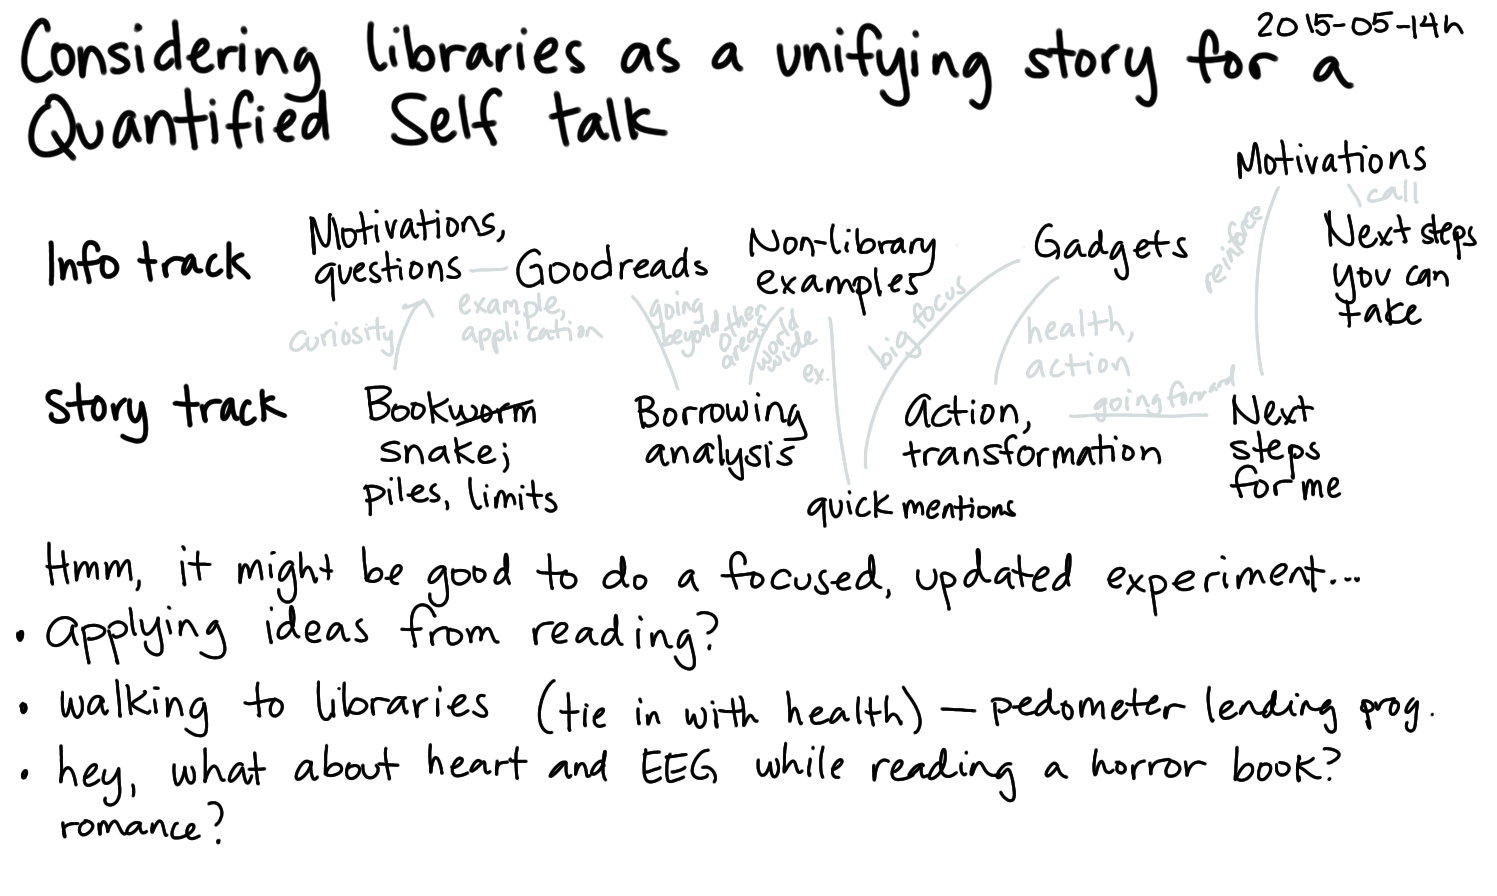 2015-05-14h Considering libraries as a unifying story for a Quantified Self talk -- index card #quantified #presentation #plans.png